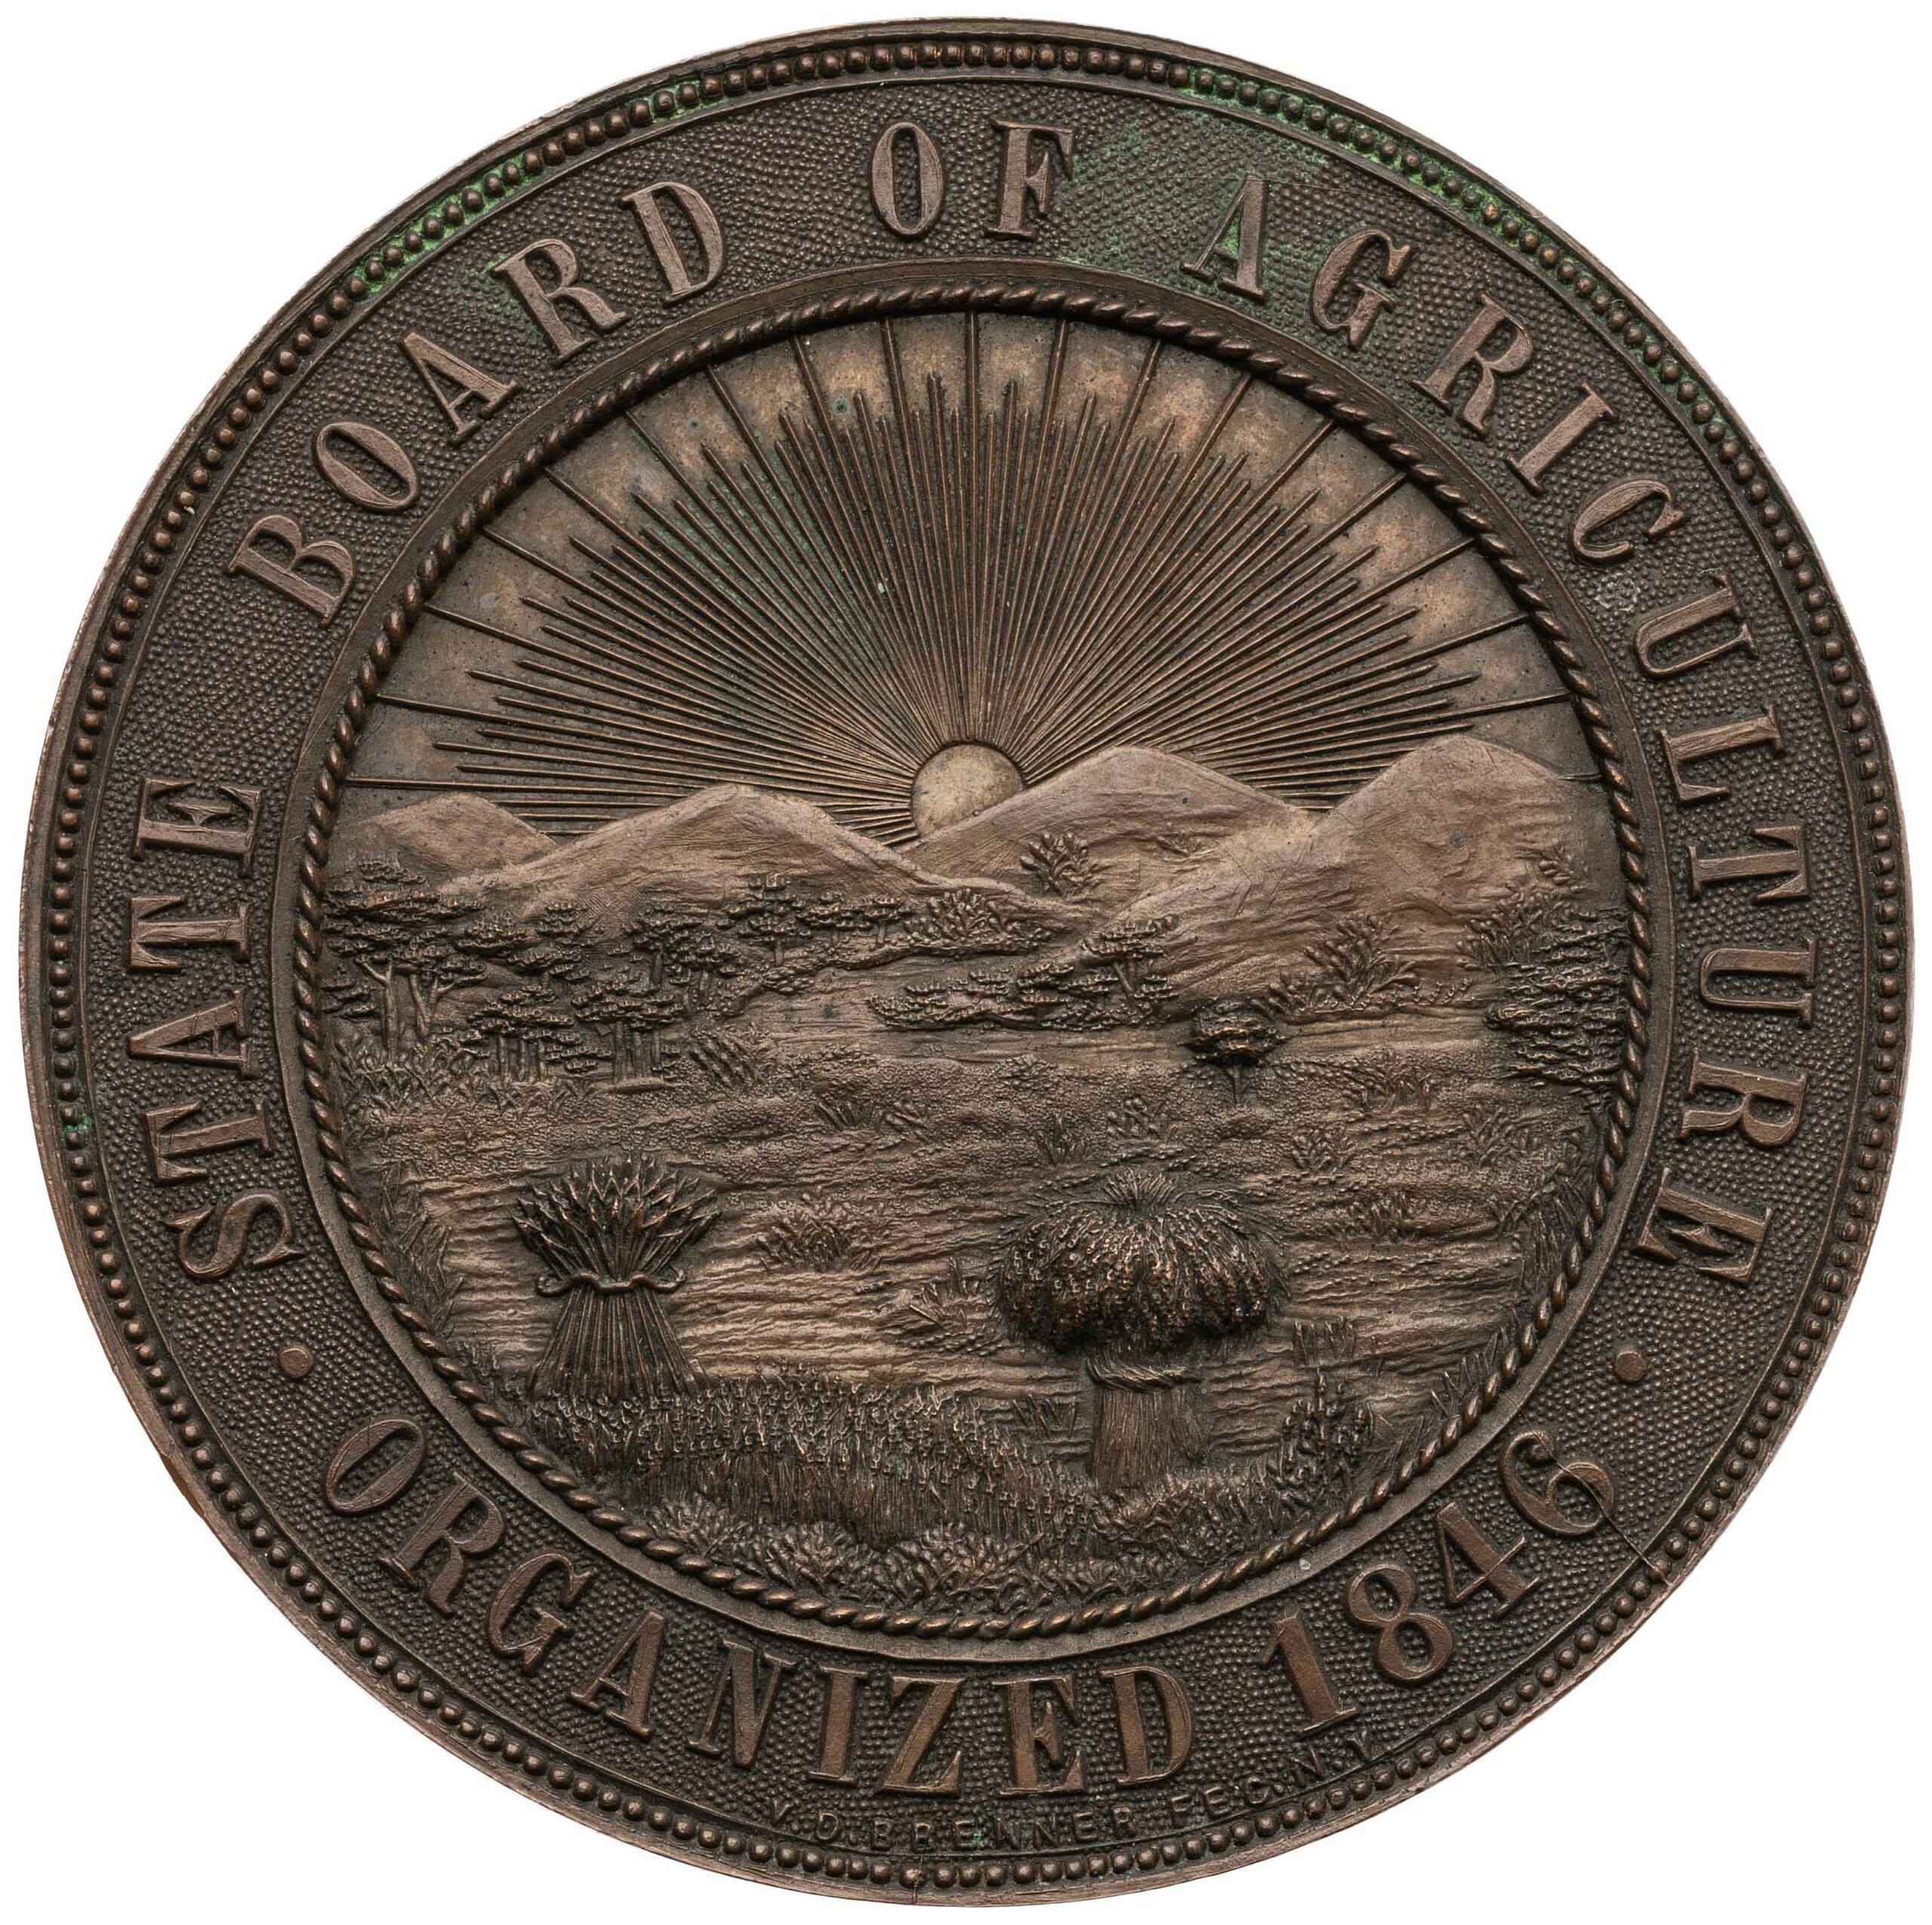 Hahlo-90, Ohio State Fair and Industrial Exposition medal